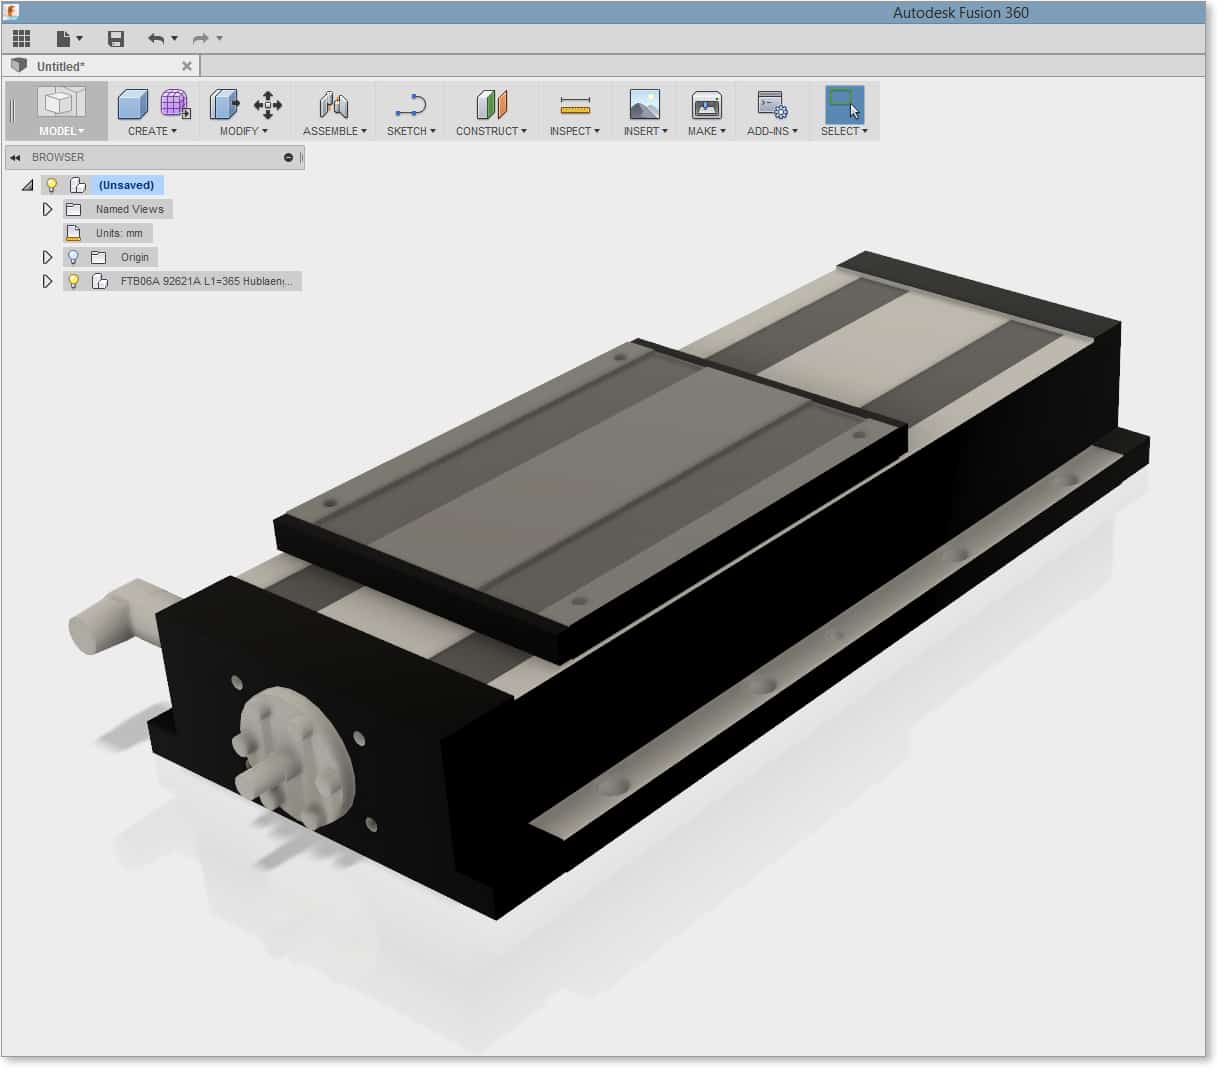 The component is instantly available for use within Autodesk Fusion 360.